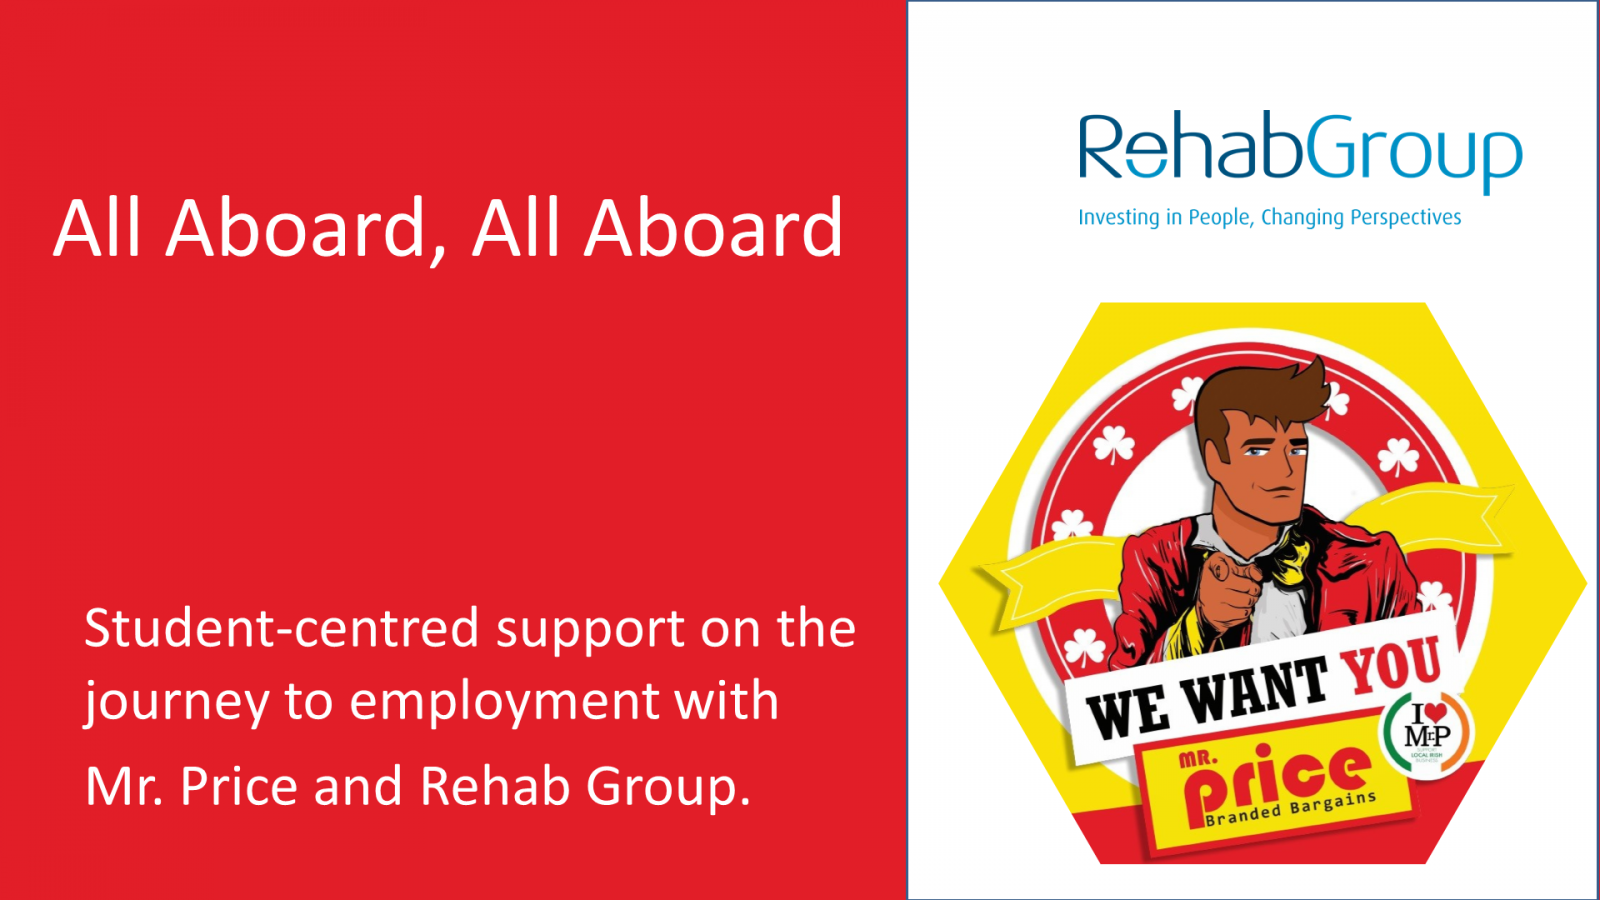 Slide 1 - All Aboard, All Aboard  Student-centred support on the journey to employment with Mr. Price and Rehab Group.   Text on Red Background on Left Hand Side of Slide  White Background on Right Hand Side of Slide Rehab Group Logo above the Mr Price Logo. The character points above the text “We Want You, Mr. Price Branded Bargains”. Slide 2 - Change-Makers for Employment Rates of People with Disabilities   Map of Europe on Left Hand Side of Slide showing Ireland’s employment rate of people with disabilities is 32.3% Text on the Right Hand Side of the Slide is Ireland has one of the lowest employment rates of people with disabilities in Europe.  Rehab Group and Mr. Price share a vision for inclusive Mr. Price workplaces in every Irish community. Slide 3 - Connecting Disabled Talent with the Business Needs   A map of Ireland on the right and left hand of the slides. The map on the left shows all 60 mr price locations. The map on the right shows all rehab group services.   The text between both map is A Corporate Partnership connecting over 60 Mr. Price locations with 50 National Learning Network Education and Training Centres. Slide 4 - Three Elements in Our Partnership Approach to Inclusive Employment   The left hand side of the slide has bubble chart showing three enabling factors in the partnership approach of Job Ready Candidates with Disabilities, Disability Confident Staff and Job Accommodations.  Beside that bubble chart is a red circle with the text enablers Beside that is an arrow pointing to the Mr. Price graphic. The Mr. Price Character is pointing above the text “We Want You”.  Slide 5 - The Story So Far  There are three separate  images of employees in Mr. Price Stores   Below each image is text. In order, these are: 100% of Mr. Price Stores committed to inclusive work experience placements with Rehab Group 47 Managers and Supervisors completed training with Rehab Group 53 Jobseekers with Disabilities in full-time or part time employment. Slide 6 - Beyond Individual and Organisational Impact  Text on the left hand side of the slide is  We are demonstrating practice leadership in inclusive employment. Positive impact is beyond the individual and both organisations.  We are contributing to the ambitions of the Comprehensive Employment Strategy and Article 27 of the UN Convention on the Rights of People with Disabilities.   On the Right hand side of the slide are the covers of two publications. The Comprehensive Employment Strategy for People with Disabilities and the Convention of the Right of Persons with Disabilities and Optional Protocols. 